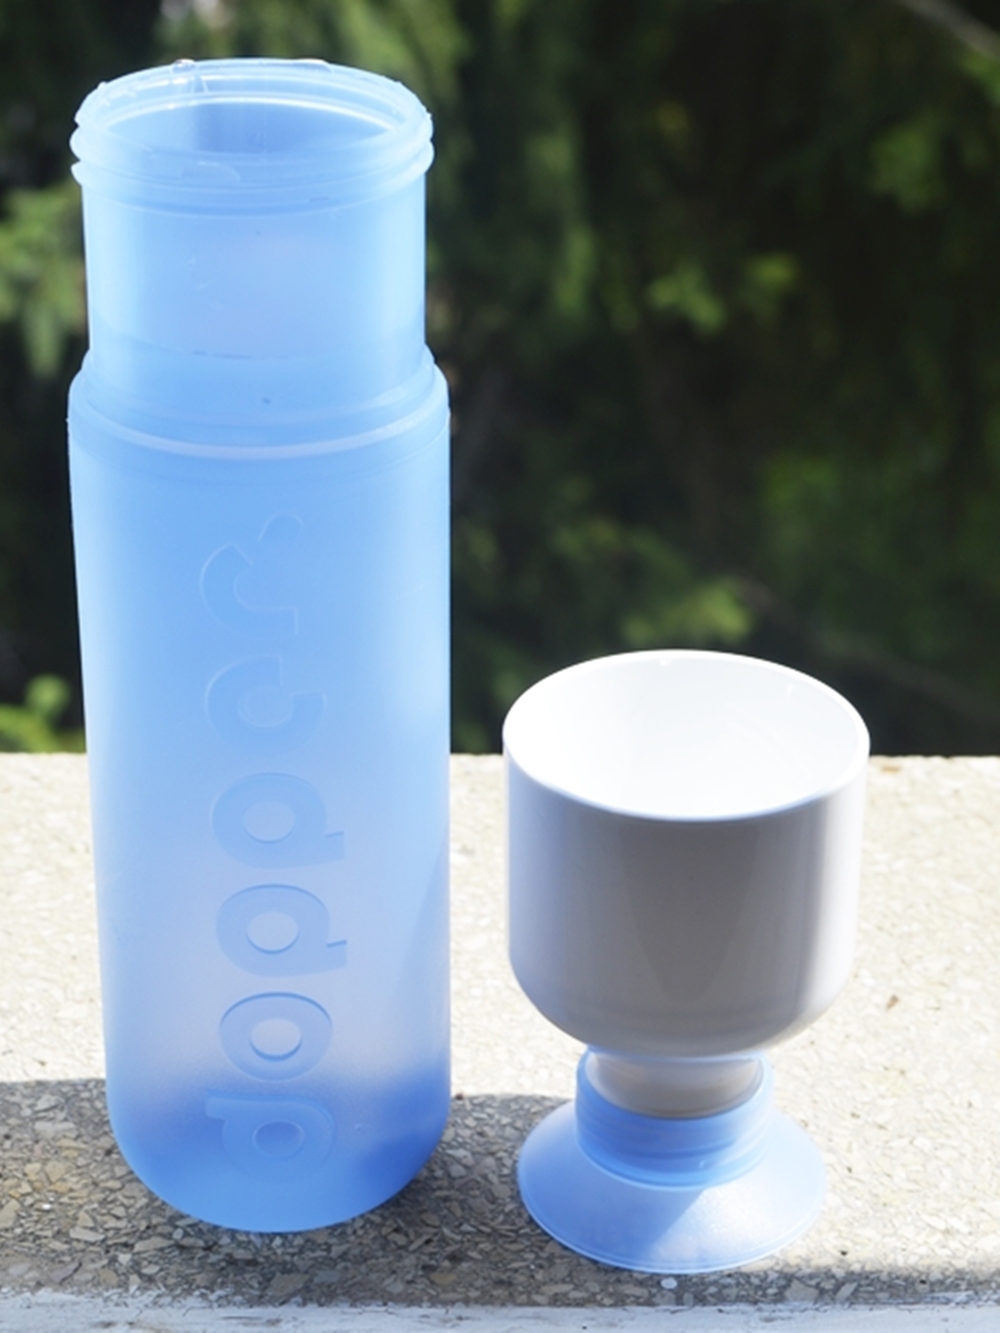 Products of the TrendBox / TrendRaider June 2016 'WaterPassion' / Dopper Bottle 'Cool Blue'